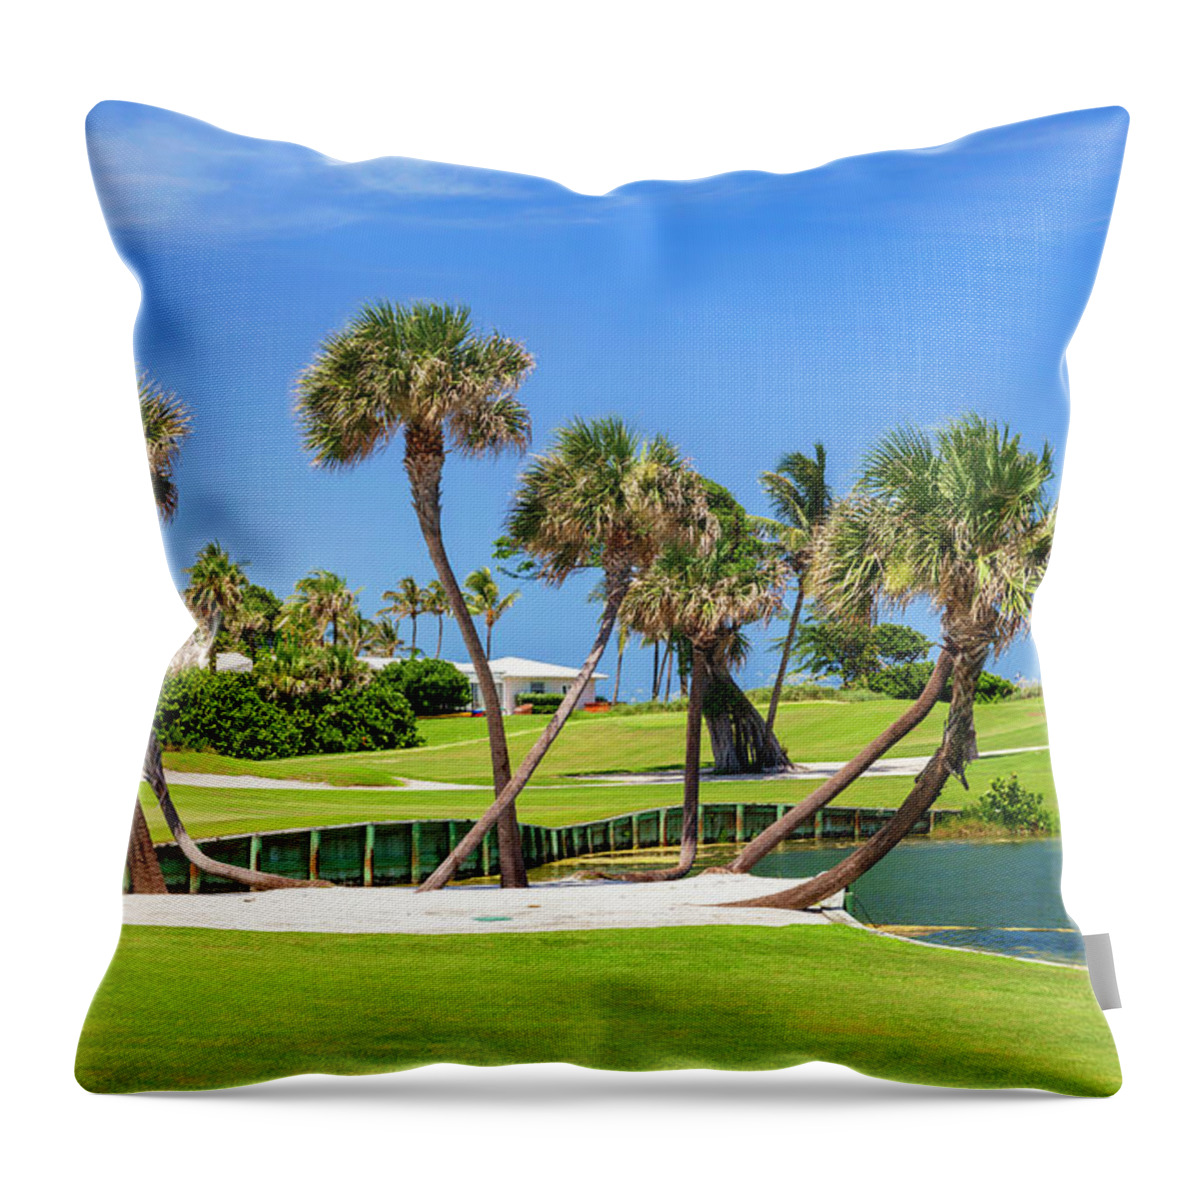 Estock Throw Pillow featuring the digital art Golf Course by Lumiere